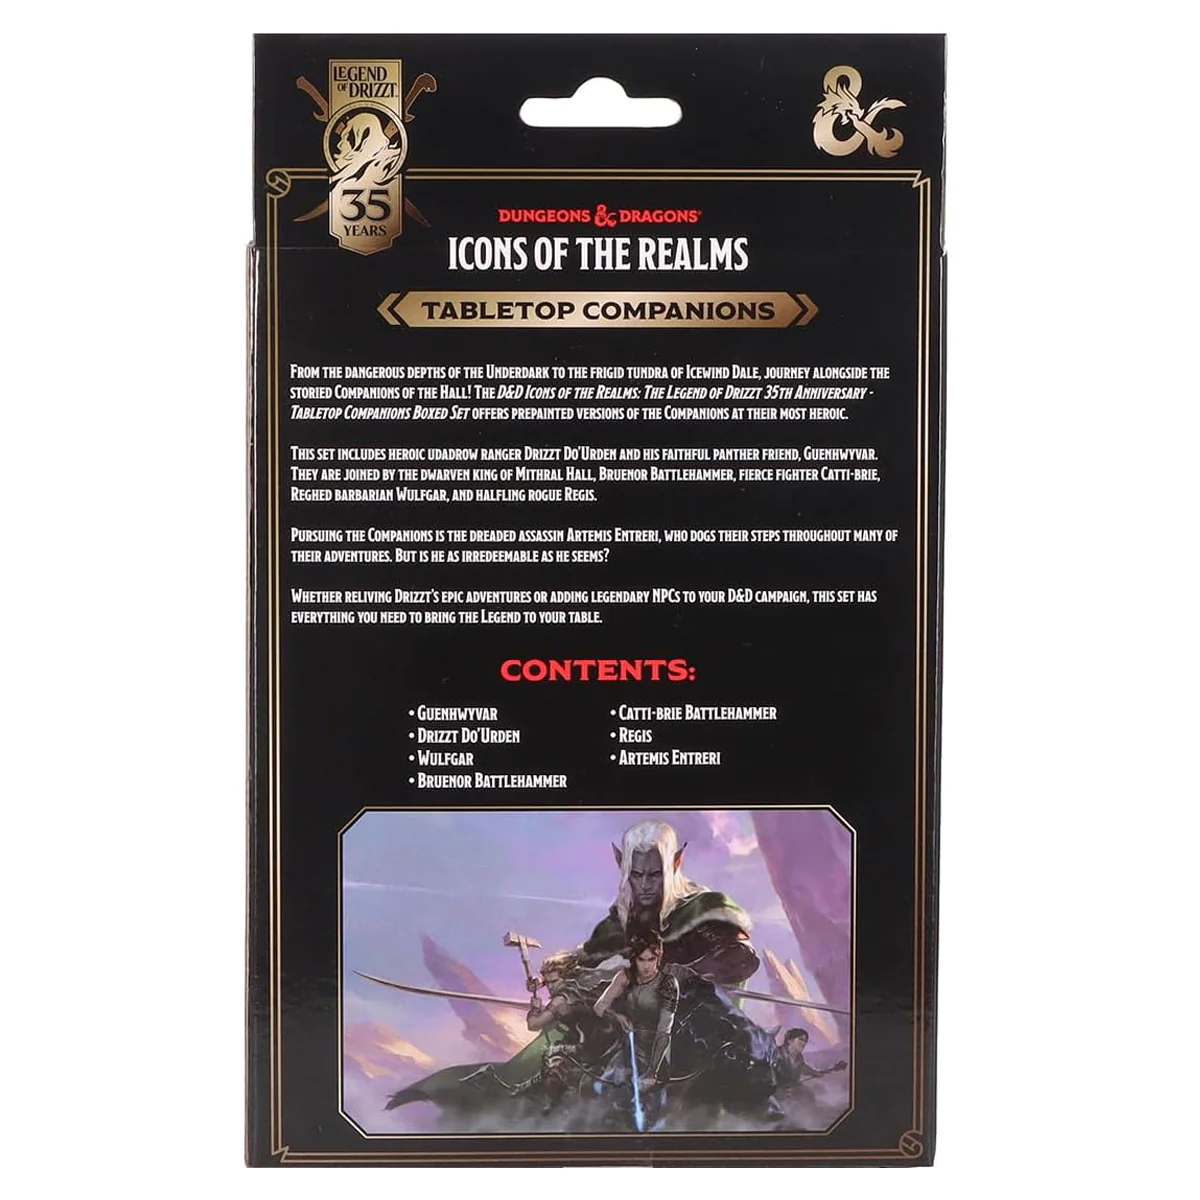 D&D The Legend of Drizzt 35th Anniversary Boxed Set Tabletop Companions